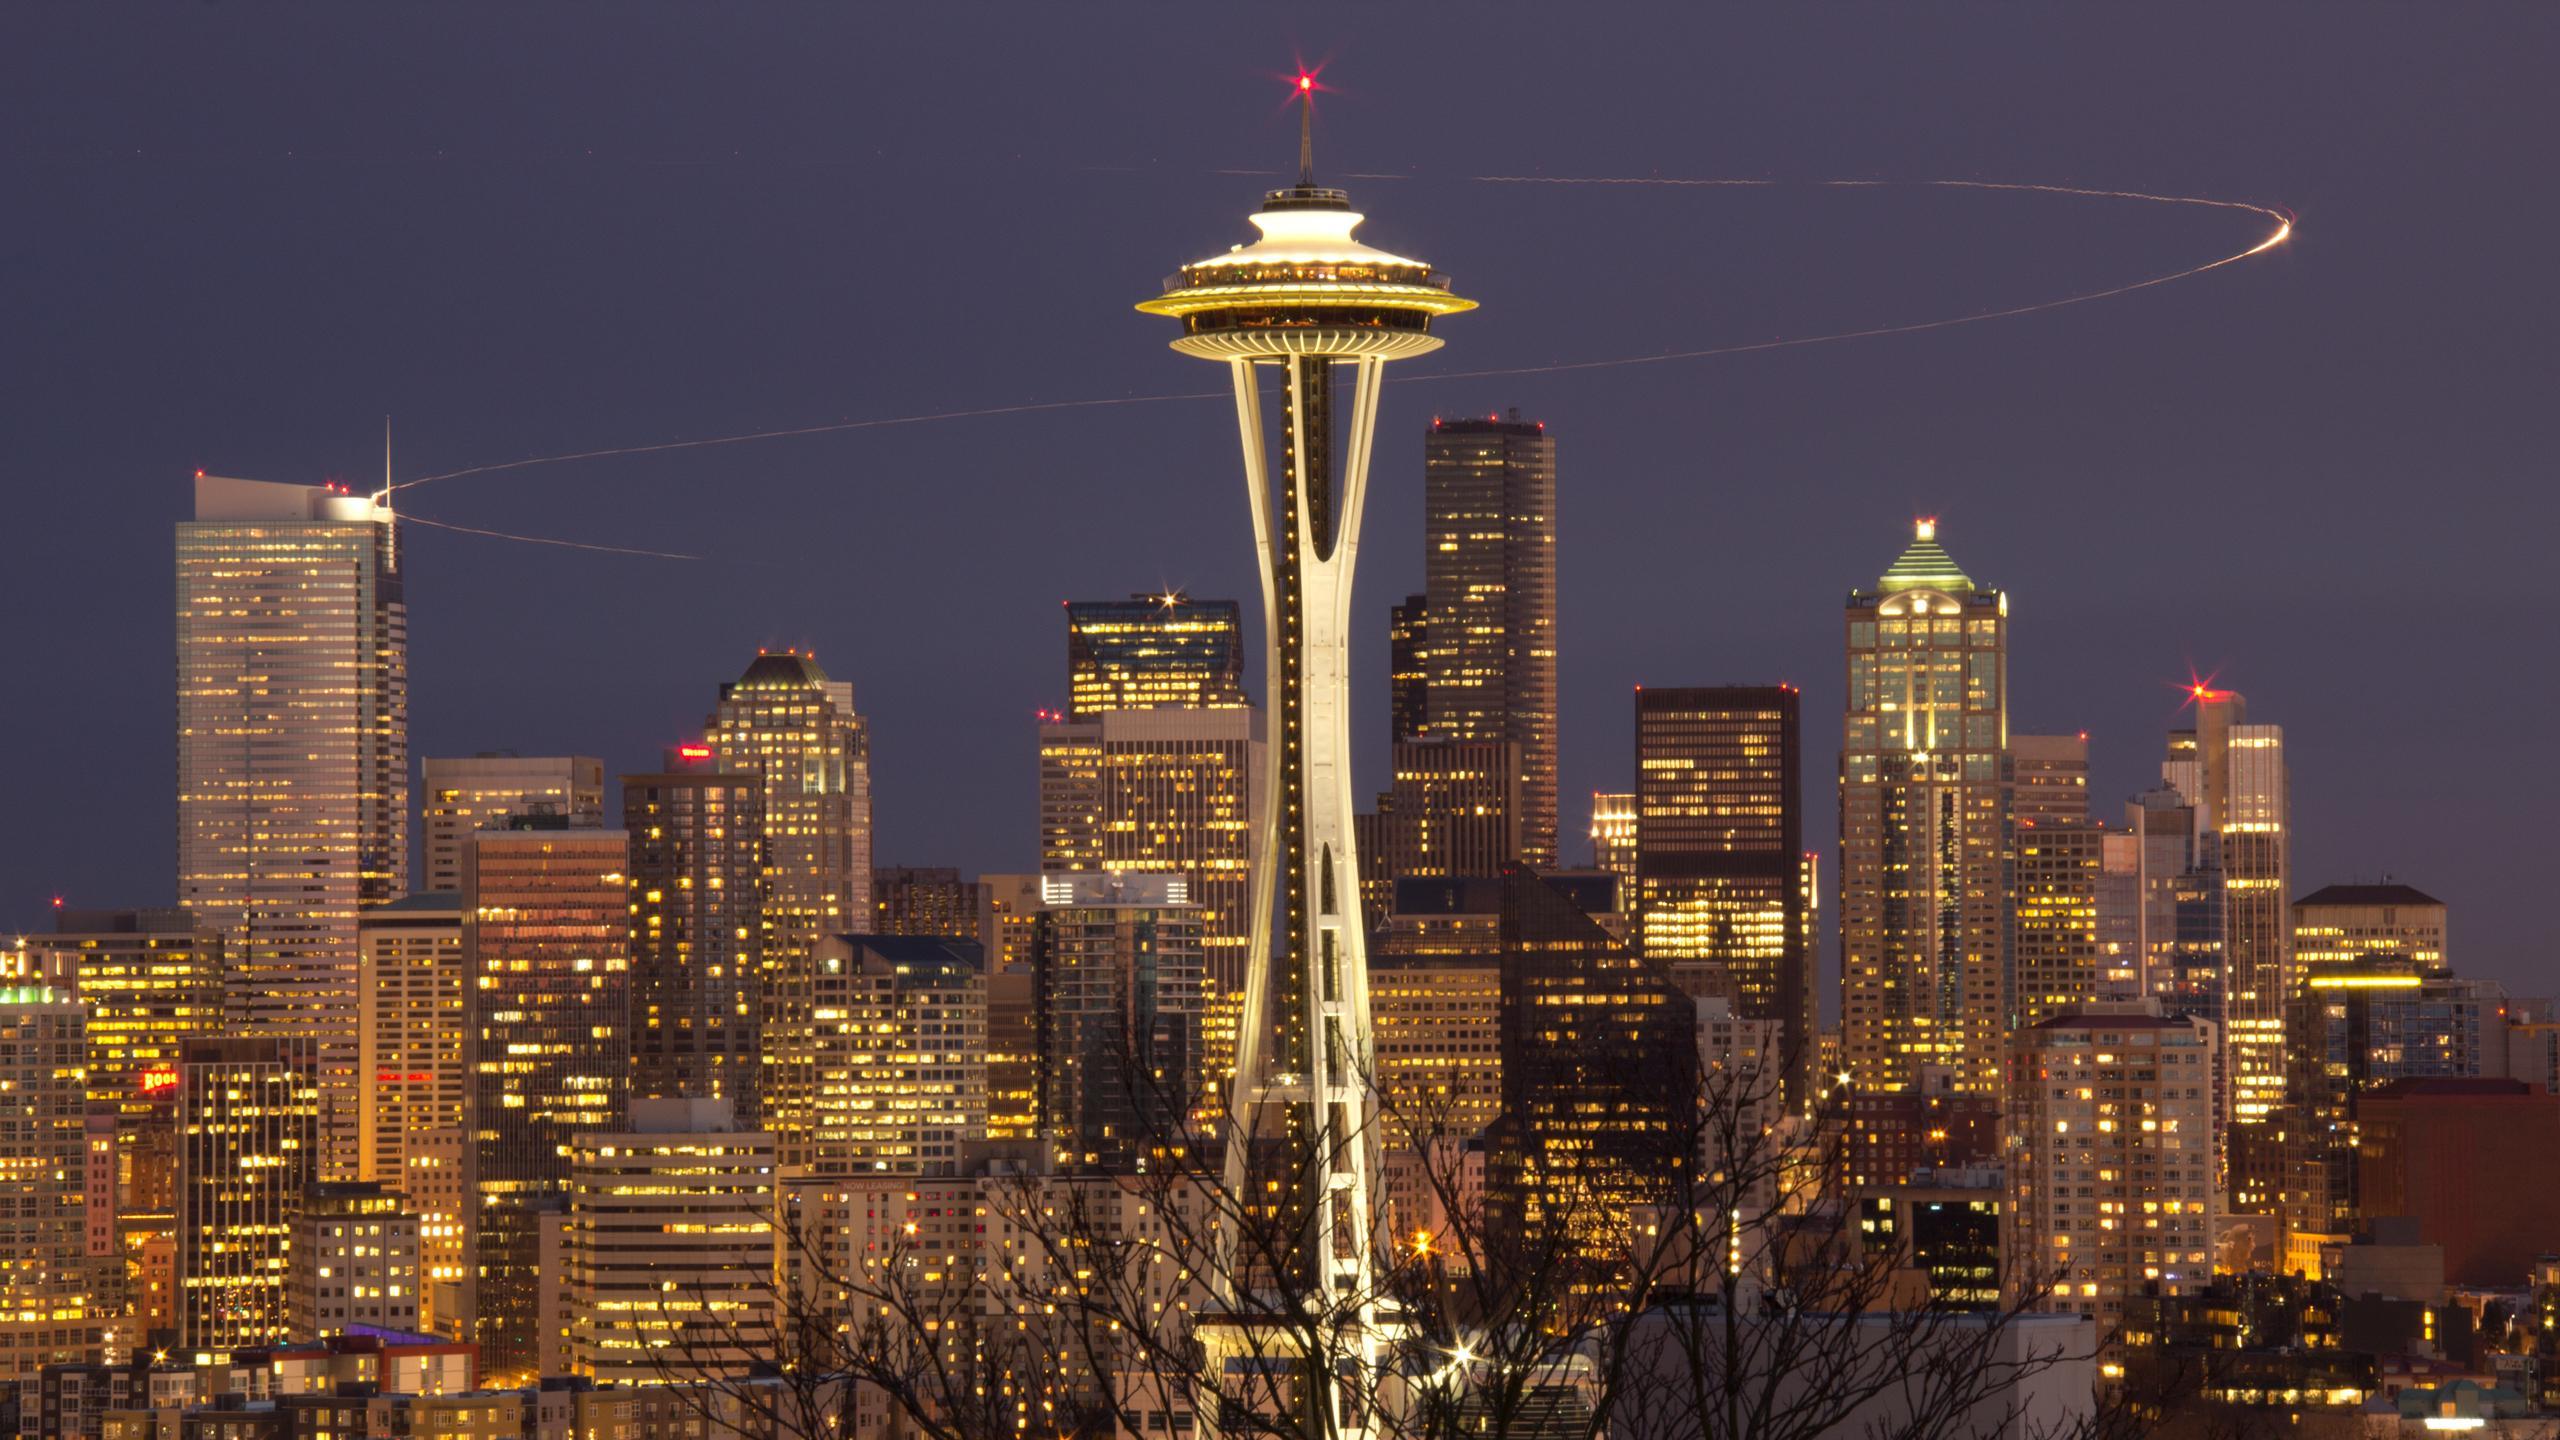 Free download Download Wallpaper Space Niddle Space Needle